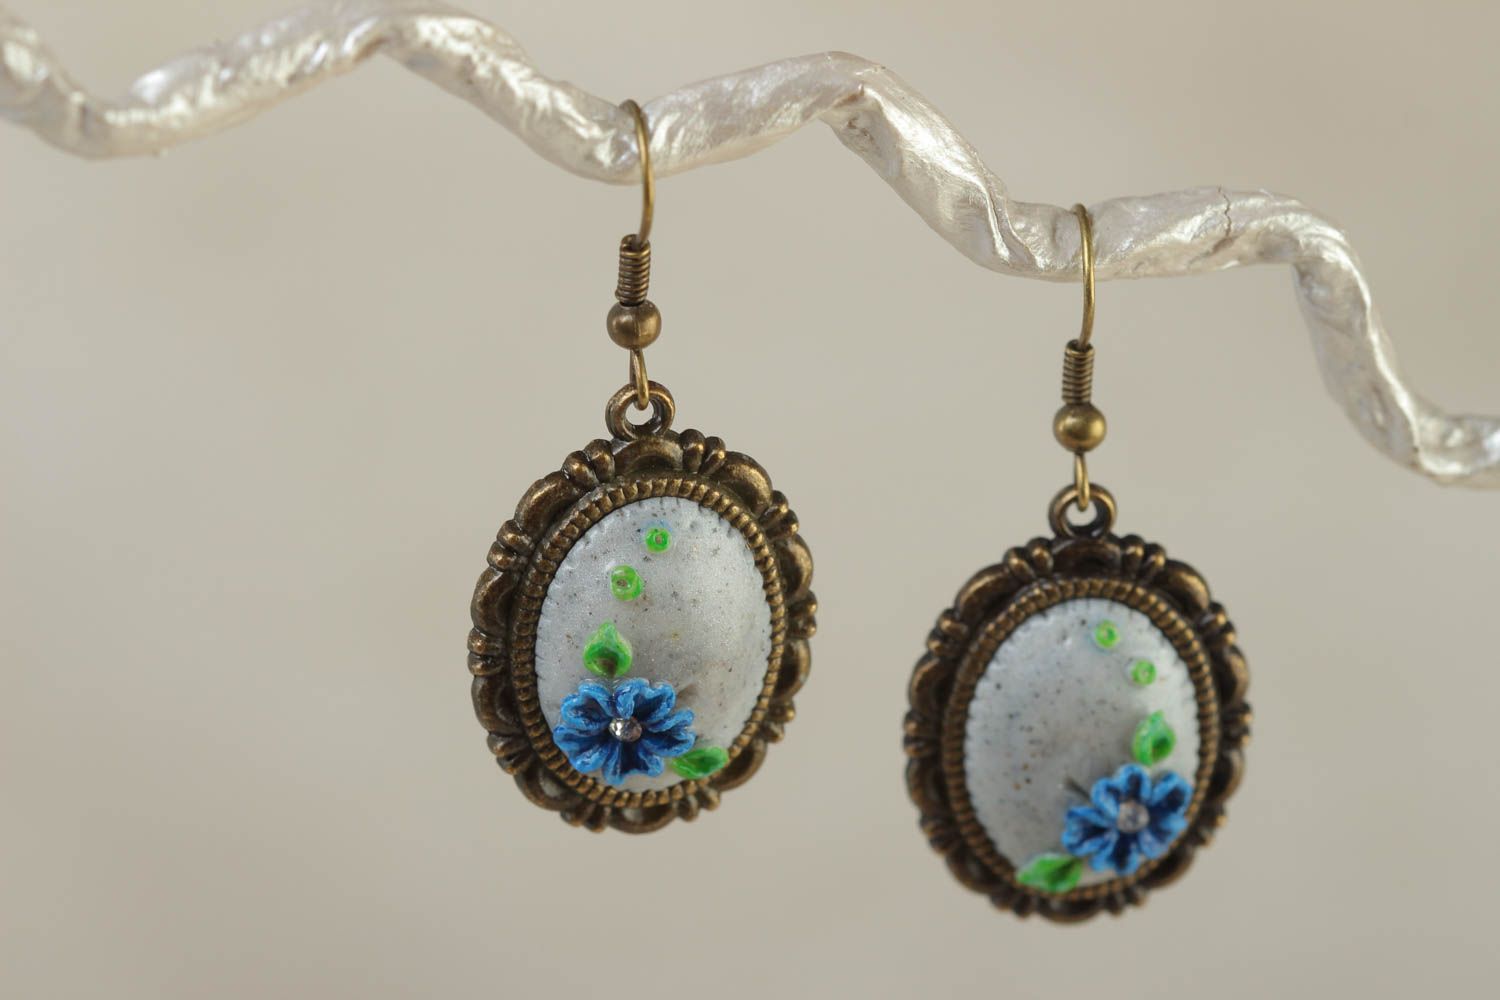 A set of handcrafted oval vintage earrings made of glass glaze with bluettes prints photo 1